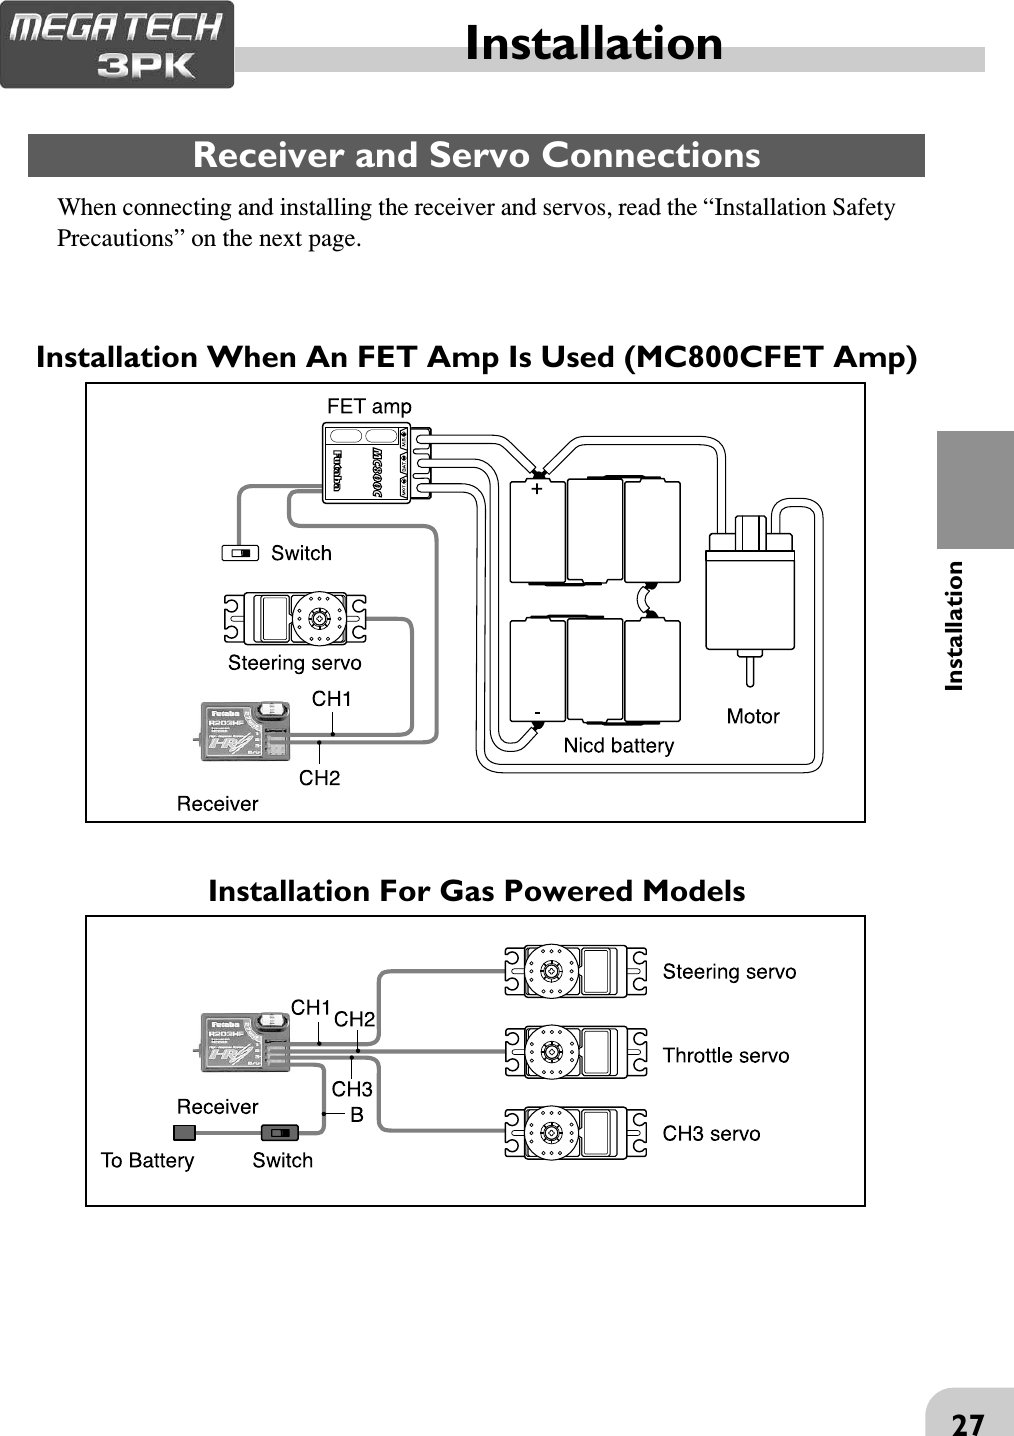 27InstallationInstallationReceiver and Servo ConnectionsInstallation When An FET Amp Is Used (MC800CFET Amp)When connecting and installing the receiver and servos, read the “Installation SafetyPrecautions” on the next page.Installation For Gas Powered Models